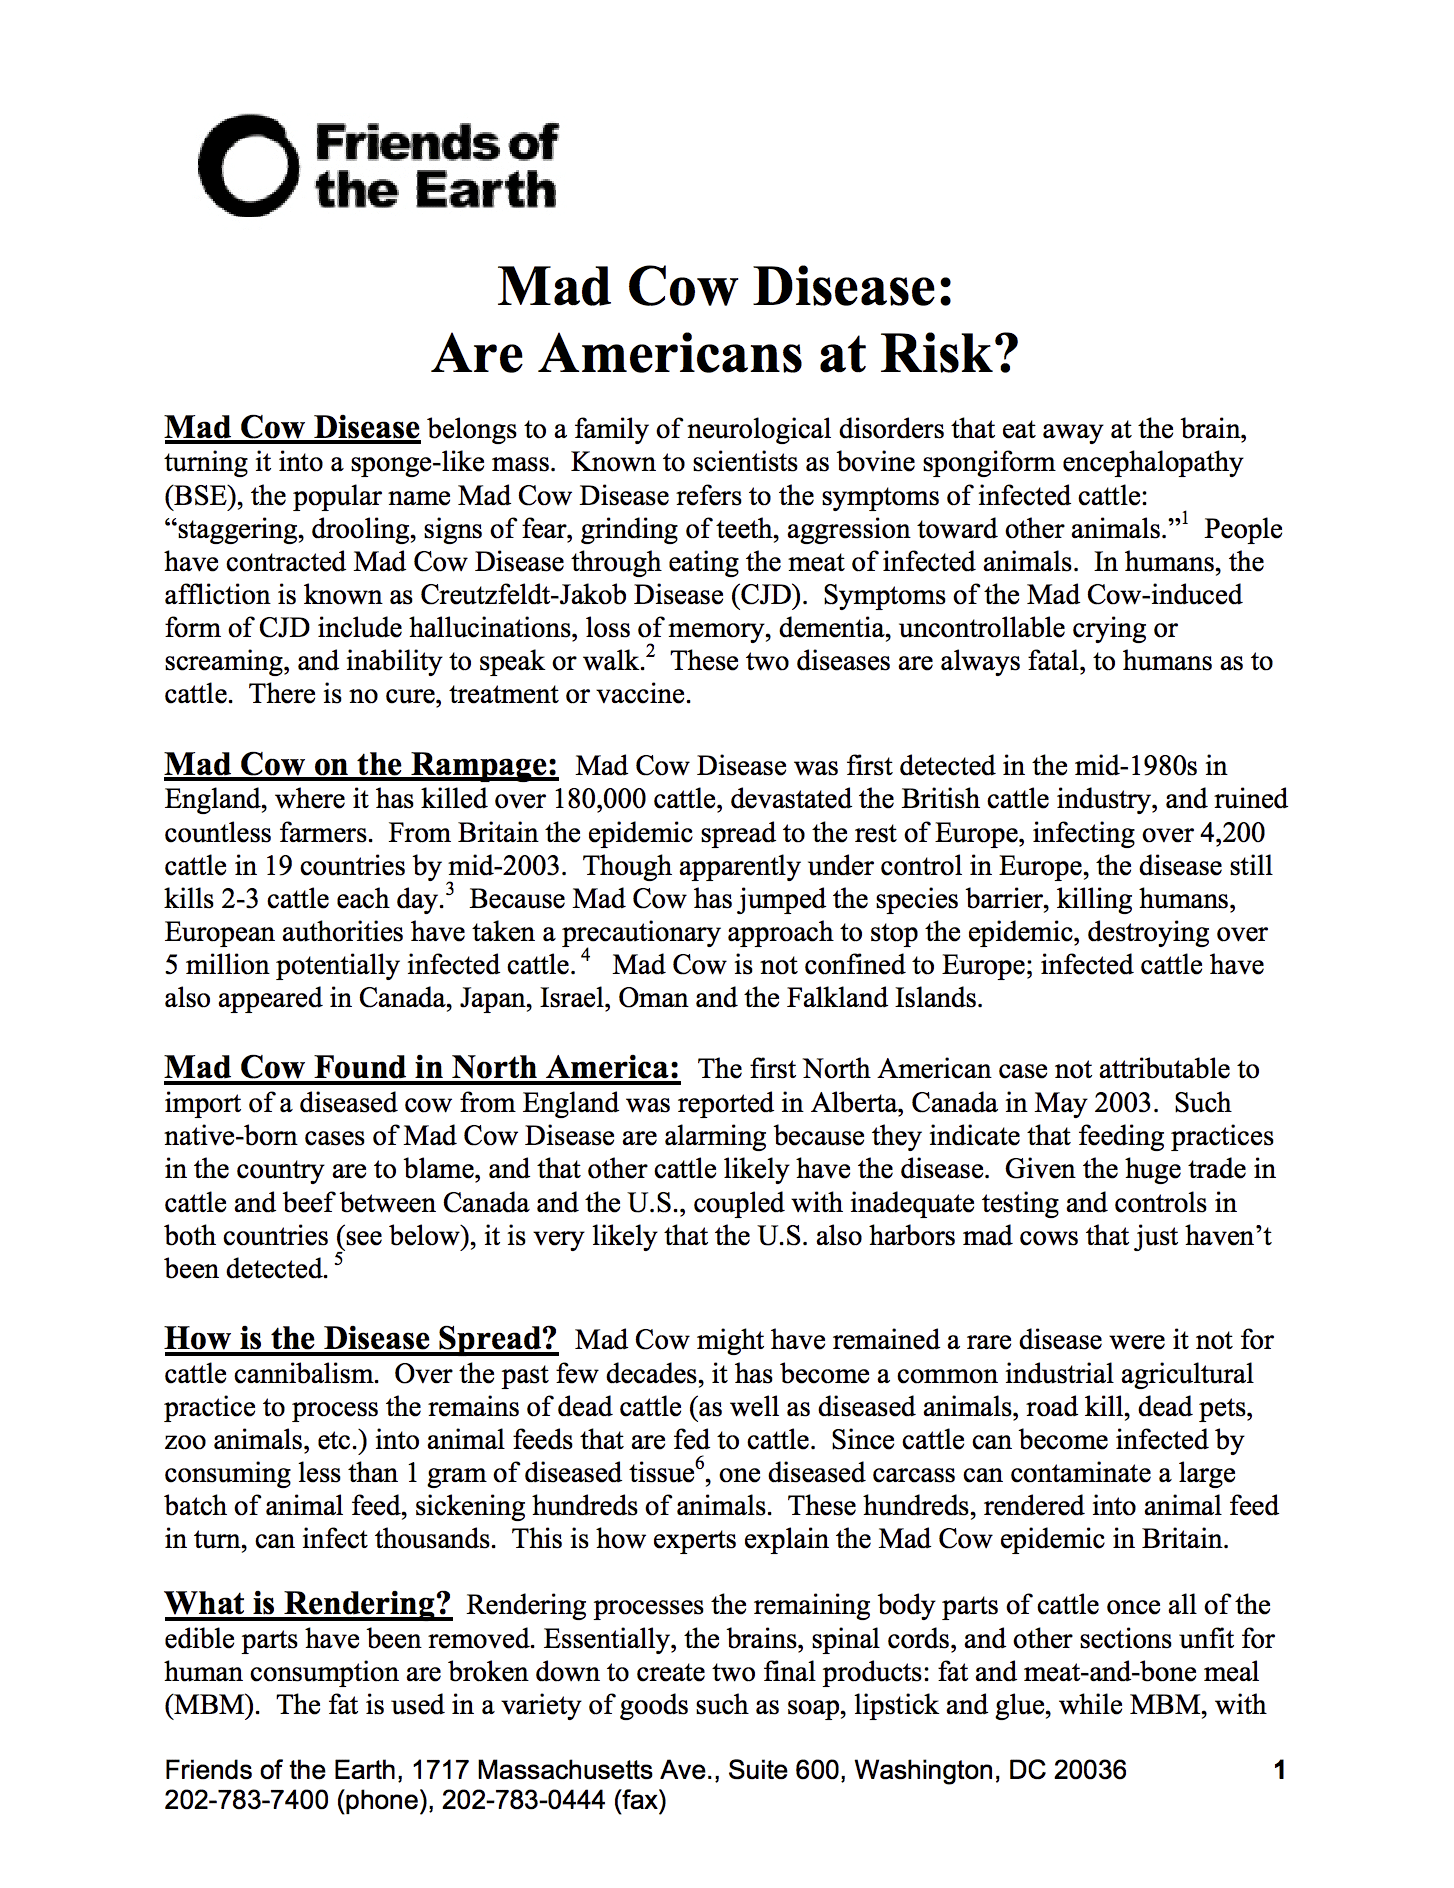 Mad cow disease: Are Americans at risk?